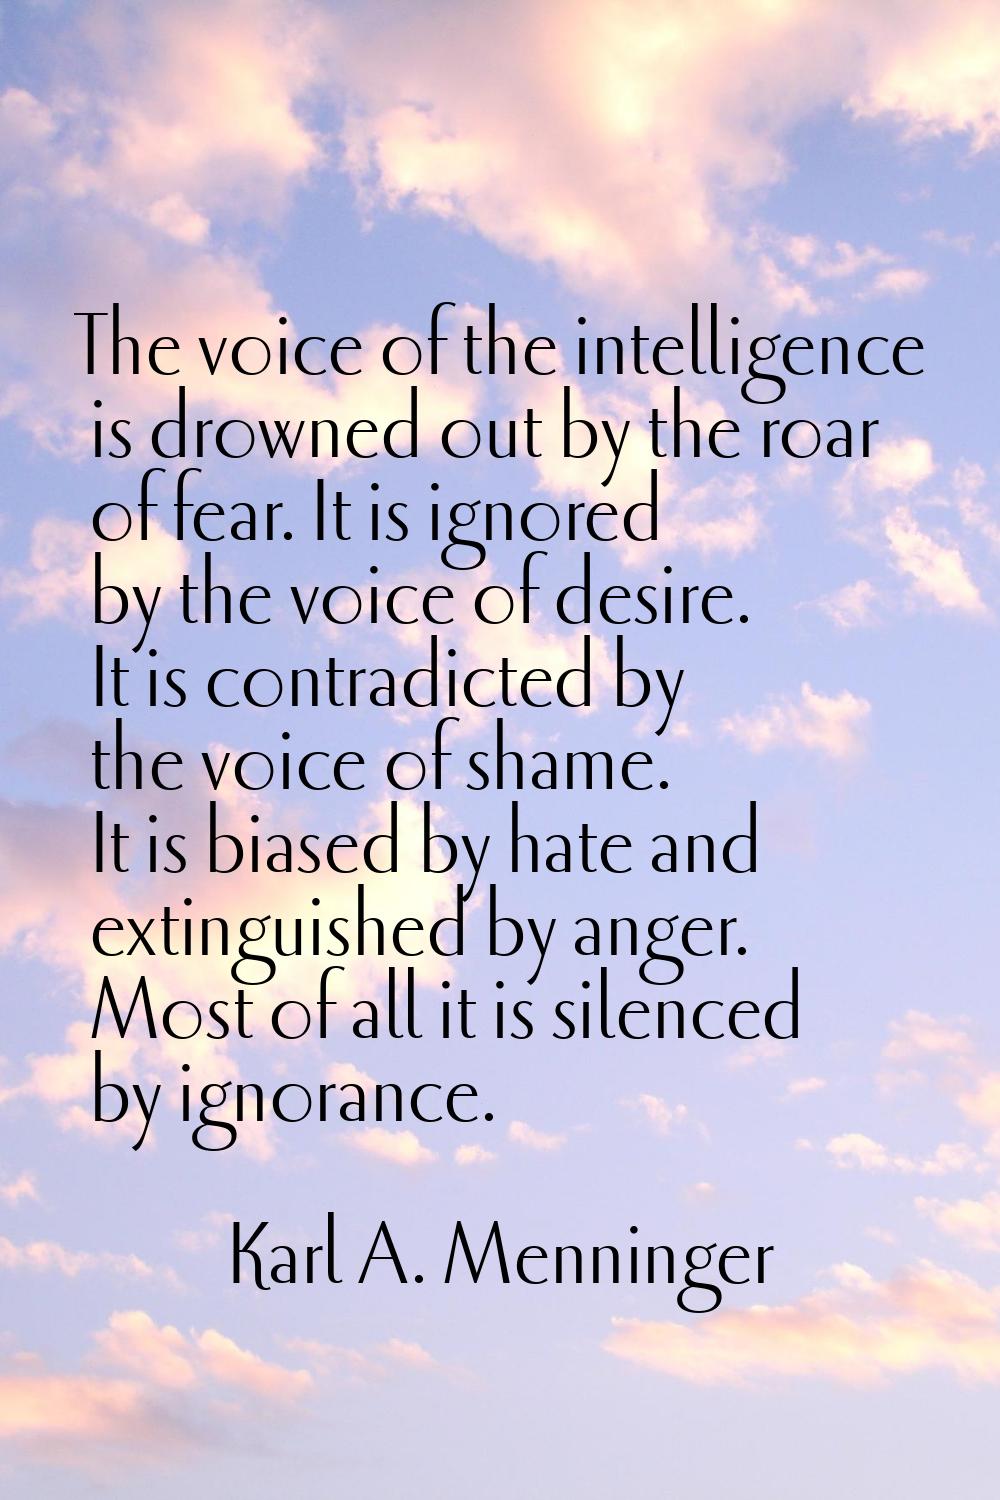 The voice of the intelligence is drowned out by the roar of fear. It is ignored by the voice of des